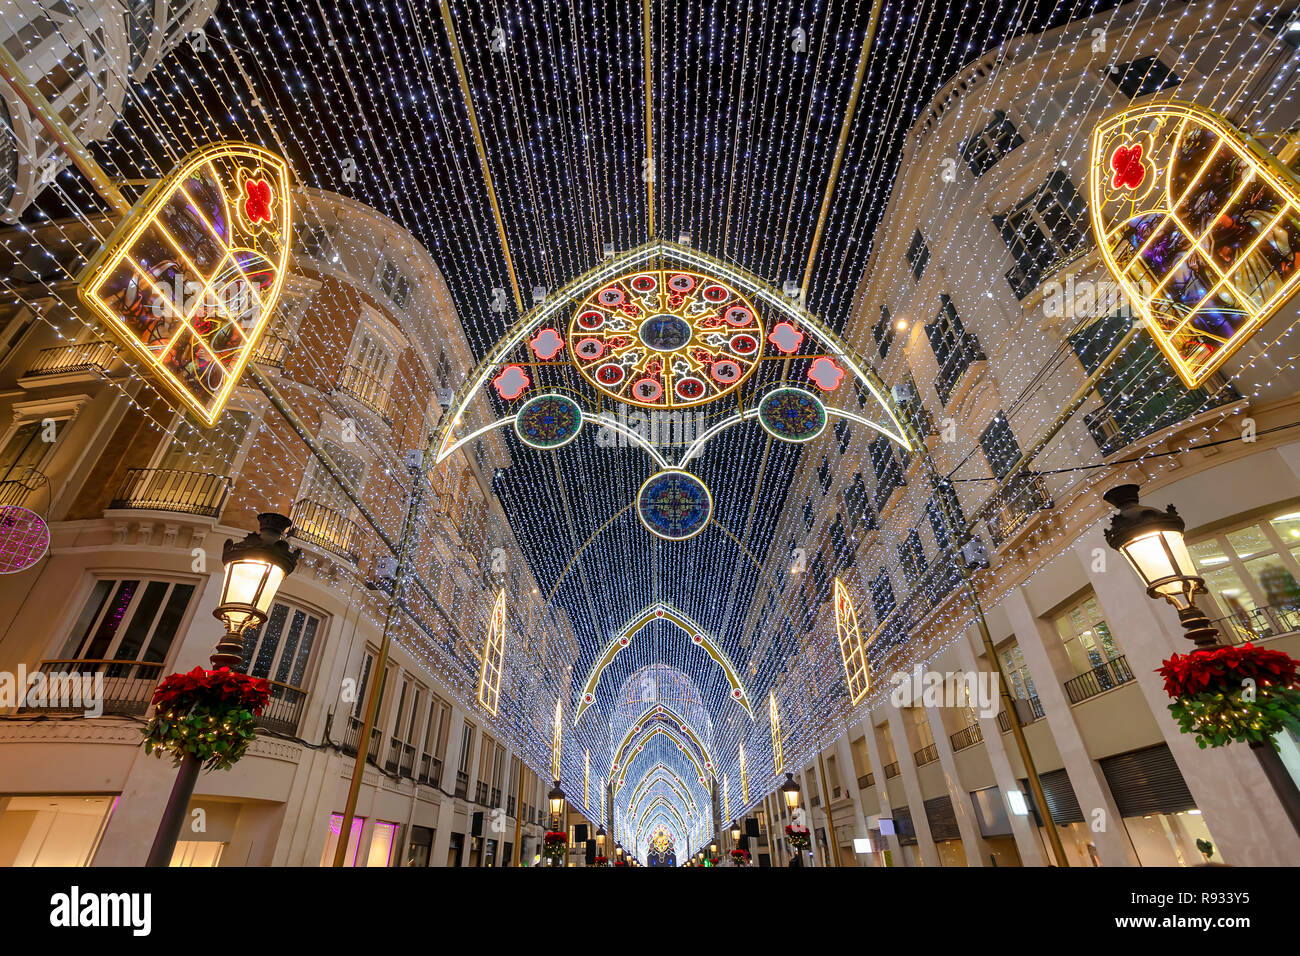 Christmas decorations on Calle Marques de Larios street in the ...